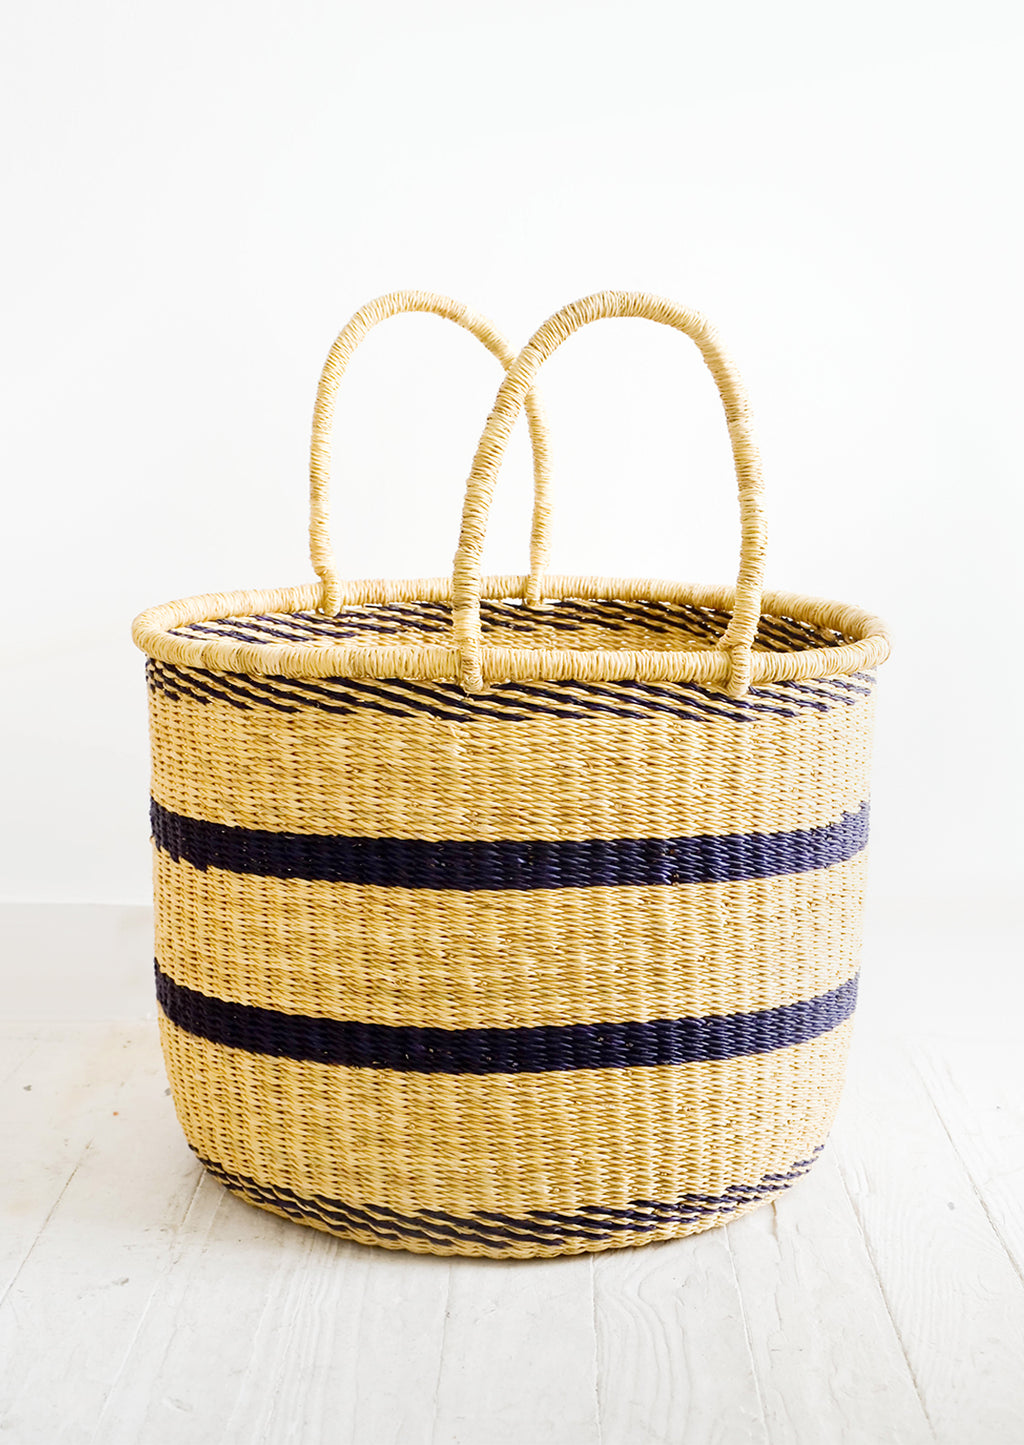 Medium: Round straw storage basket with handles at top and navy blue stripes throughout